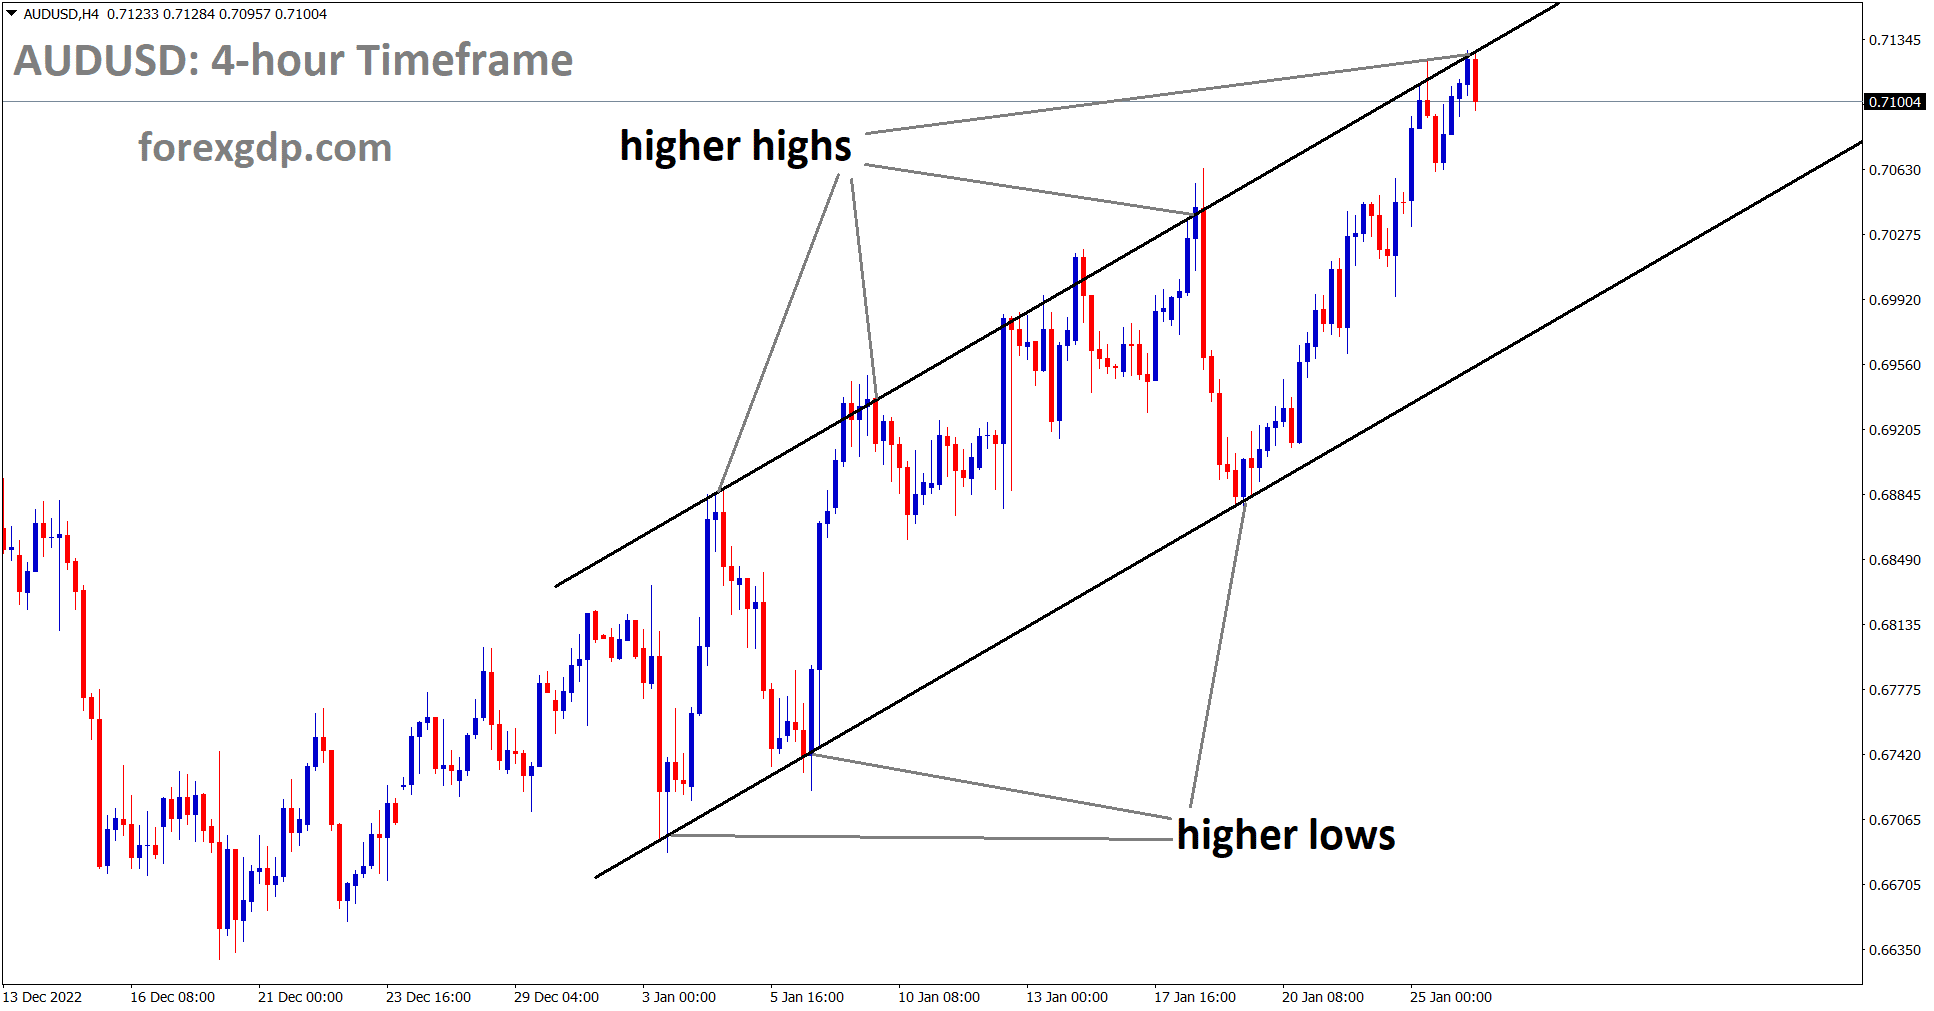 AUDUSD is moving in scending Channel and the market has reached the higher high area of the channel.